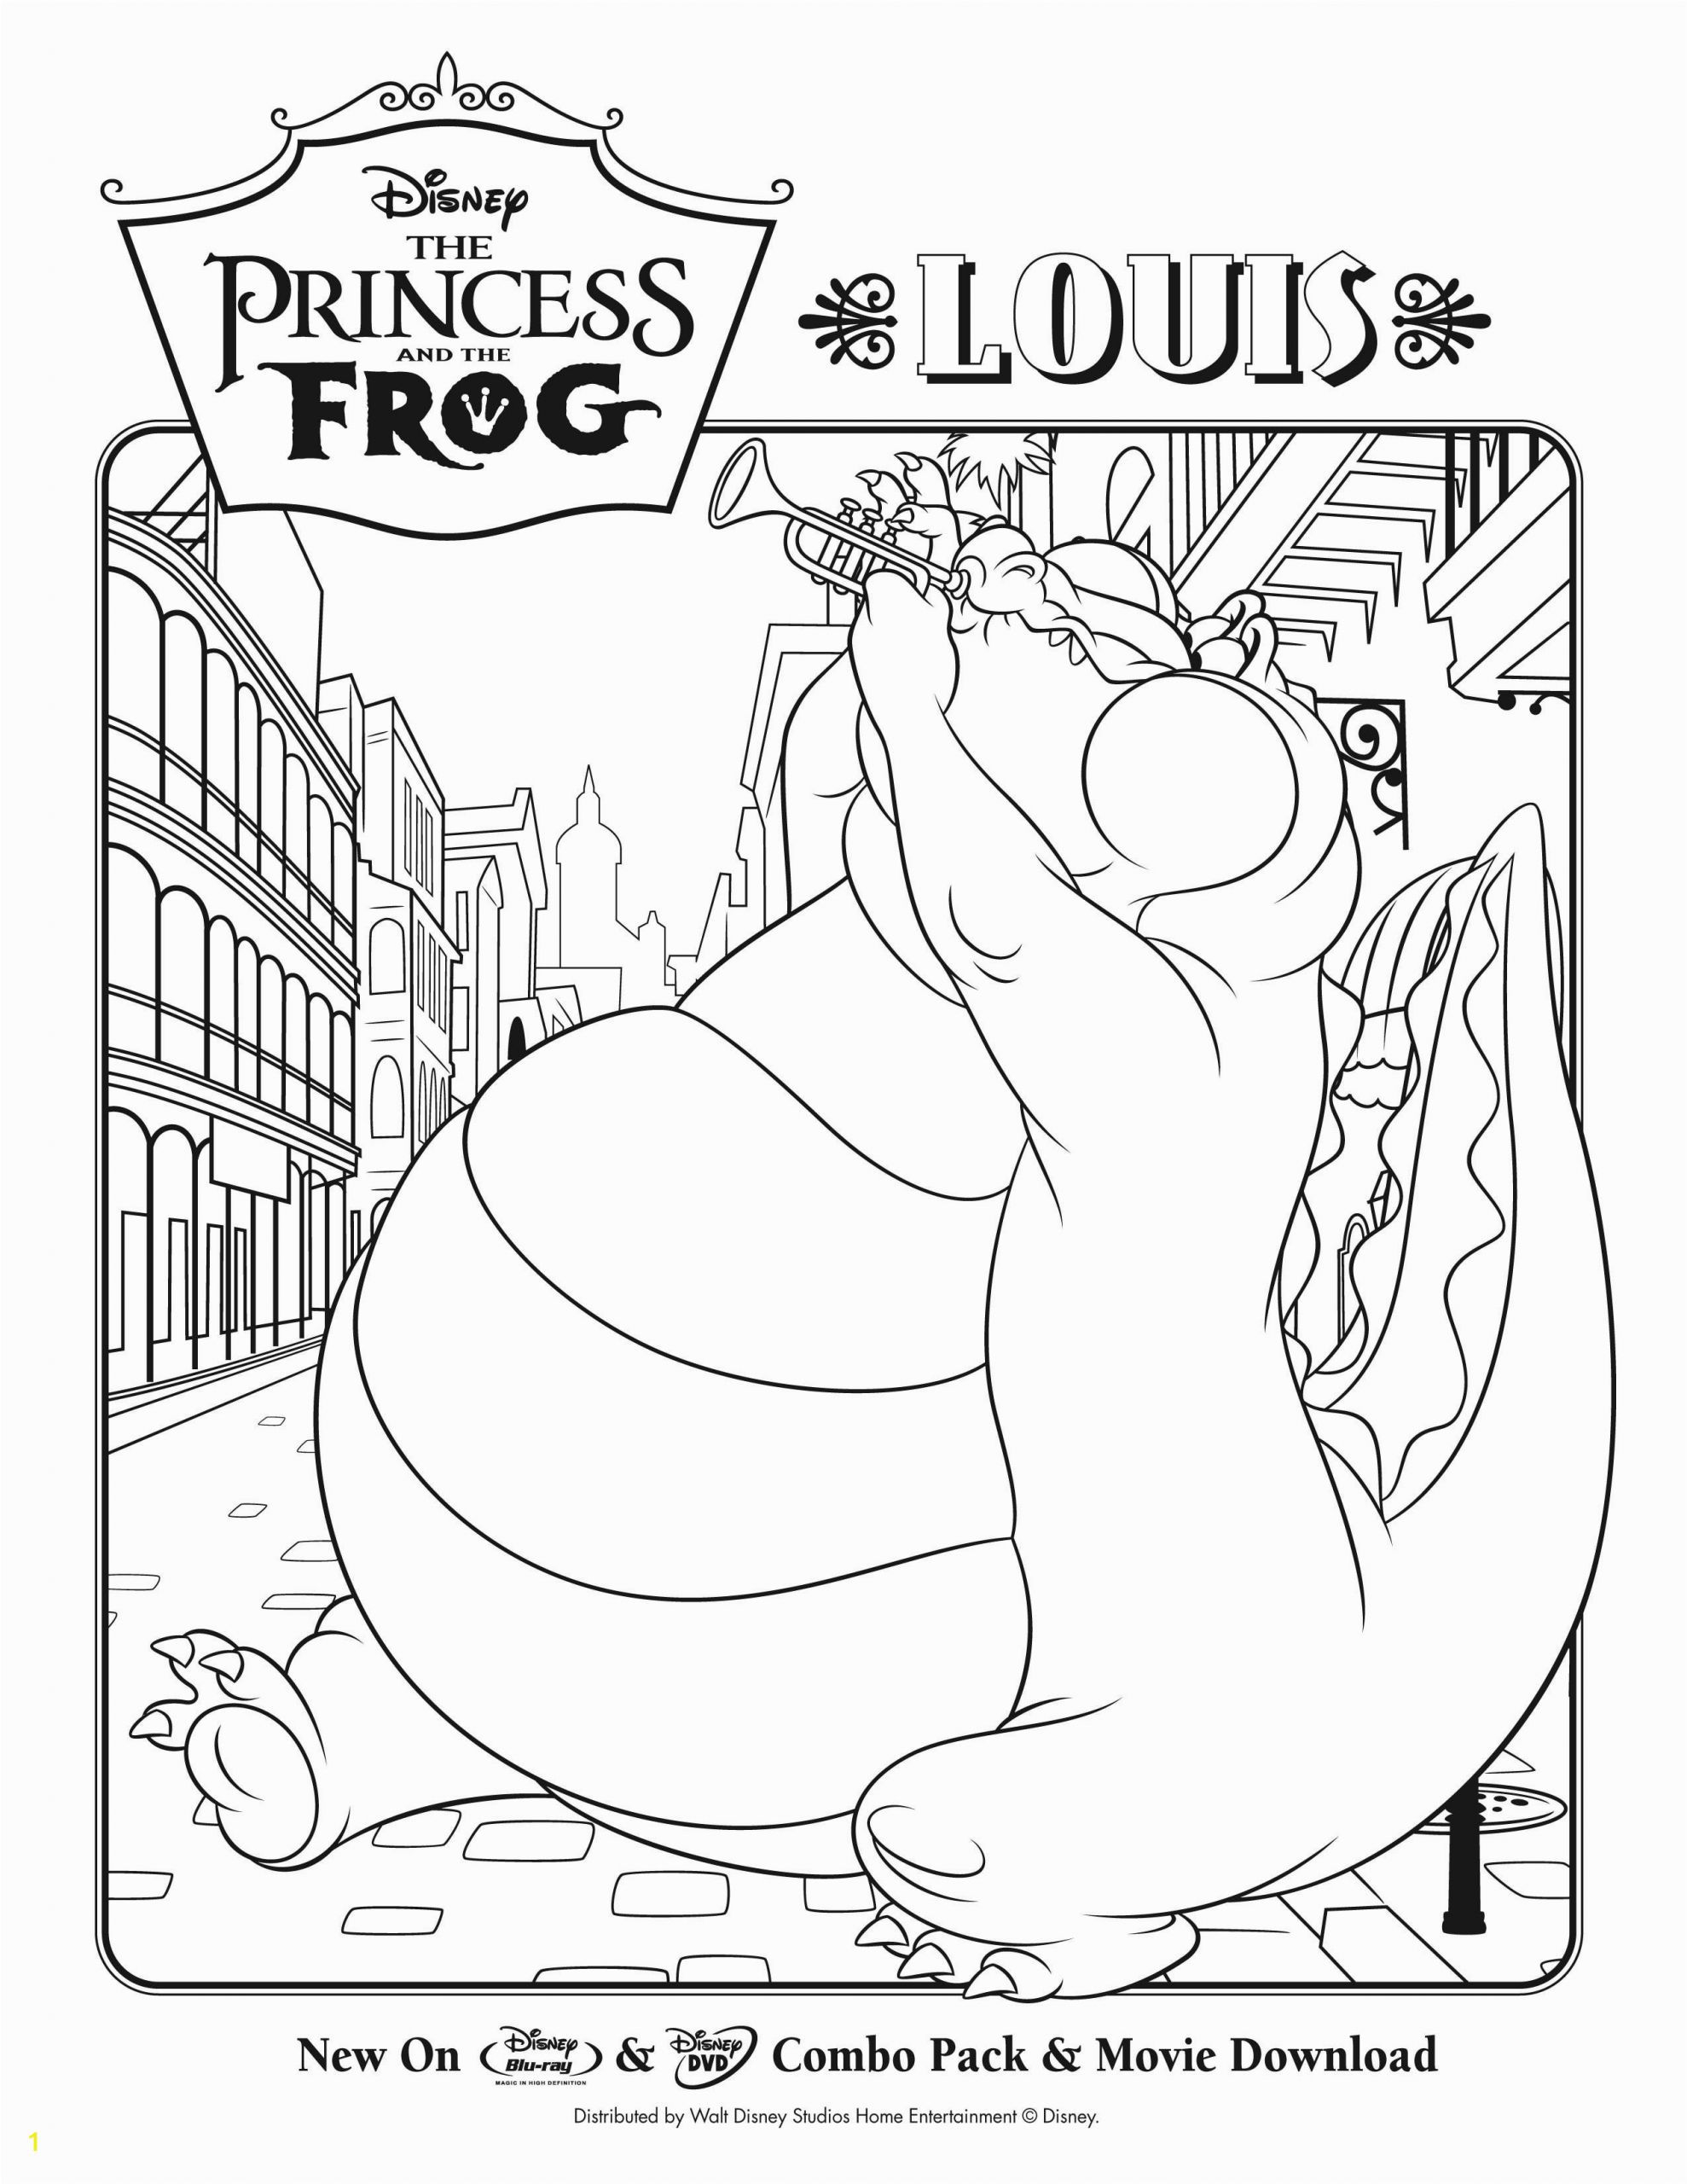 image=the princess and the frog Coloring for kids the princess and the frog 1